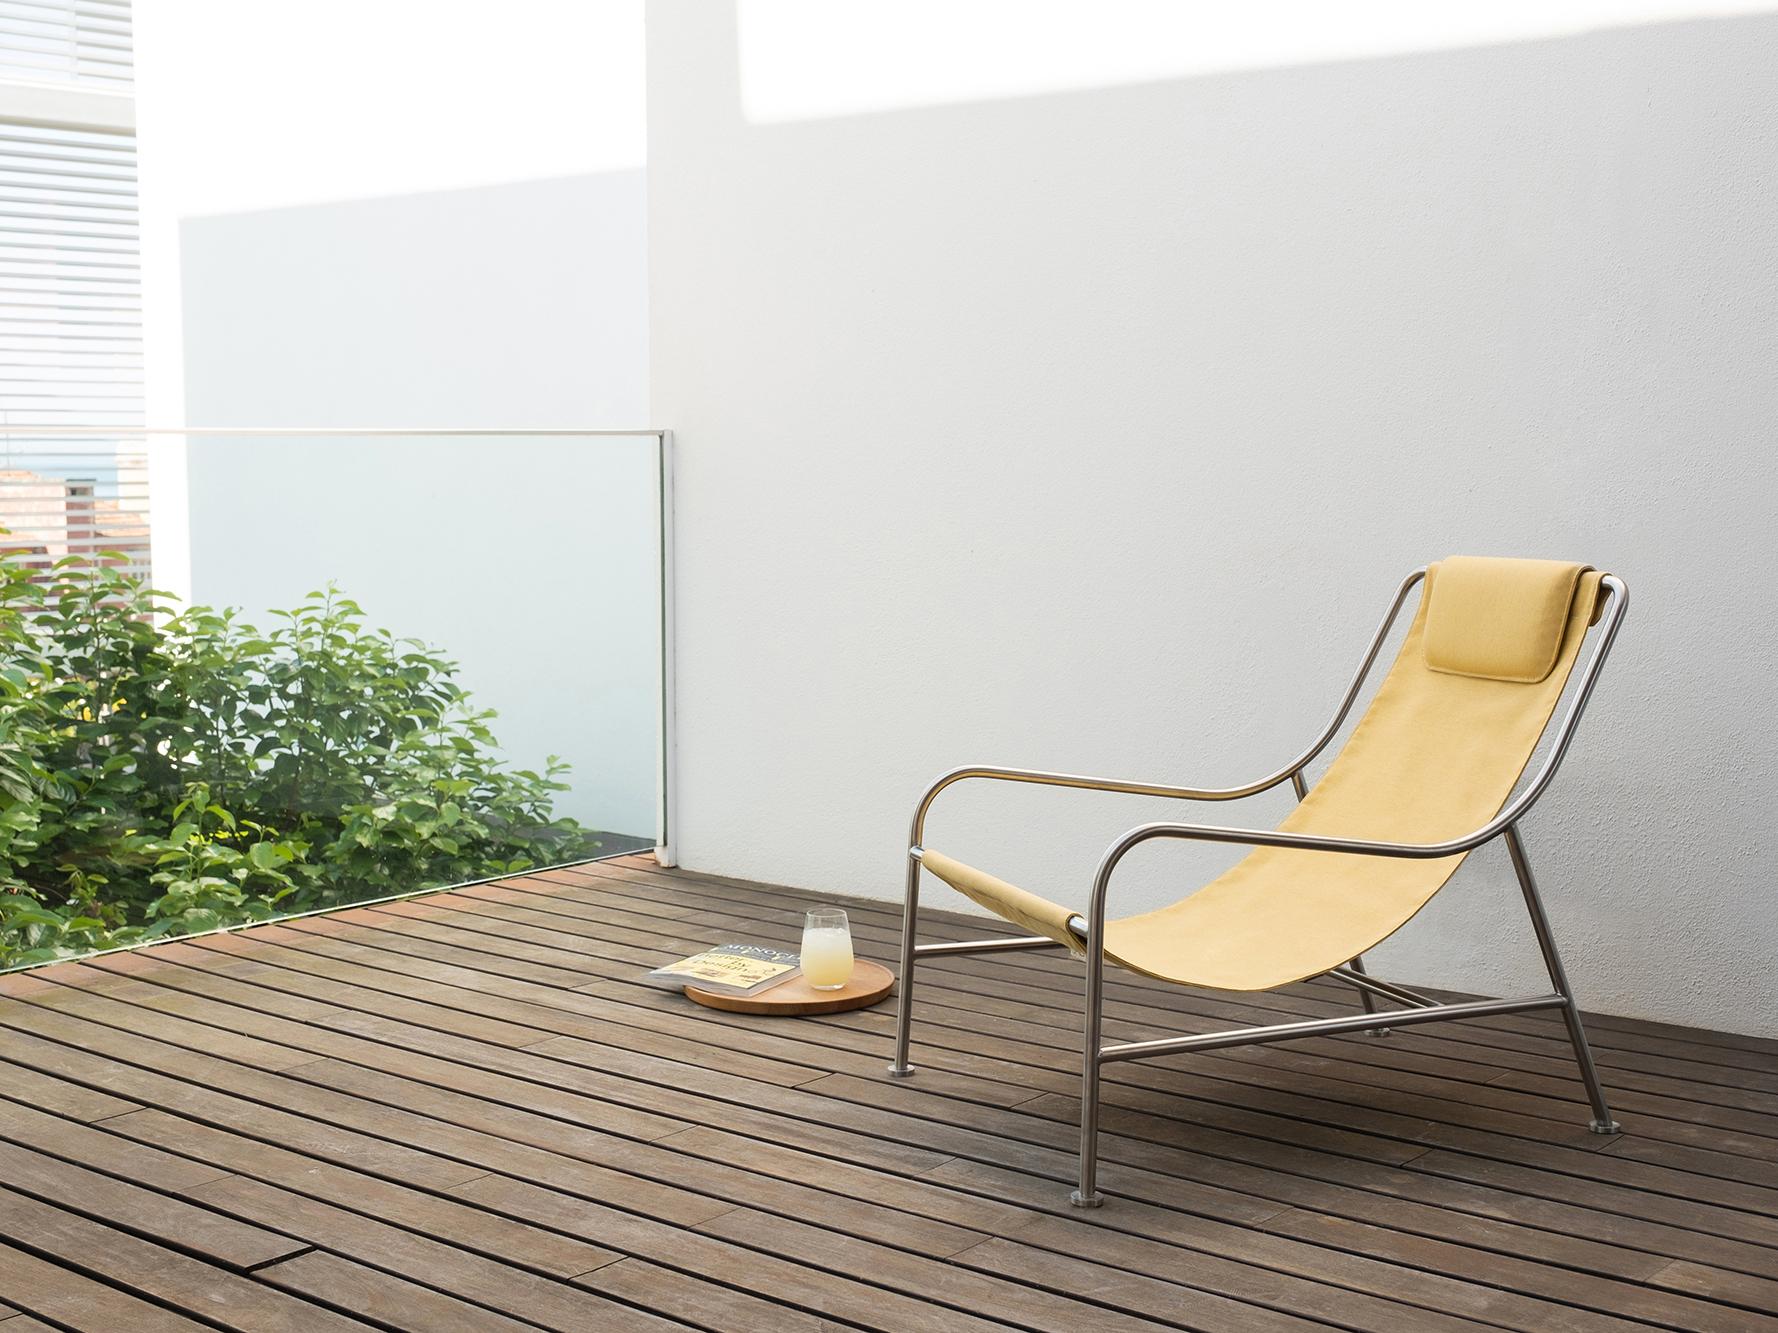 Minimalist Outdoor Lounge Chair in 